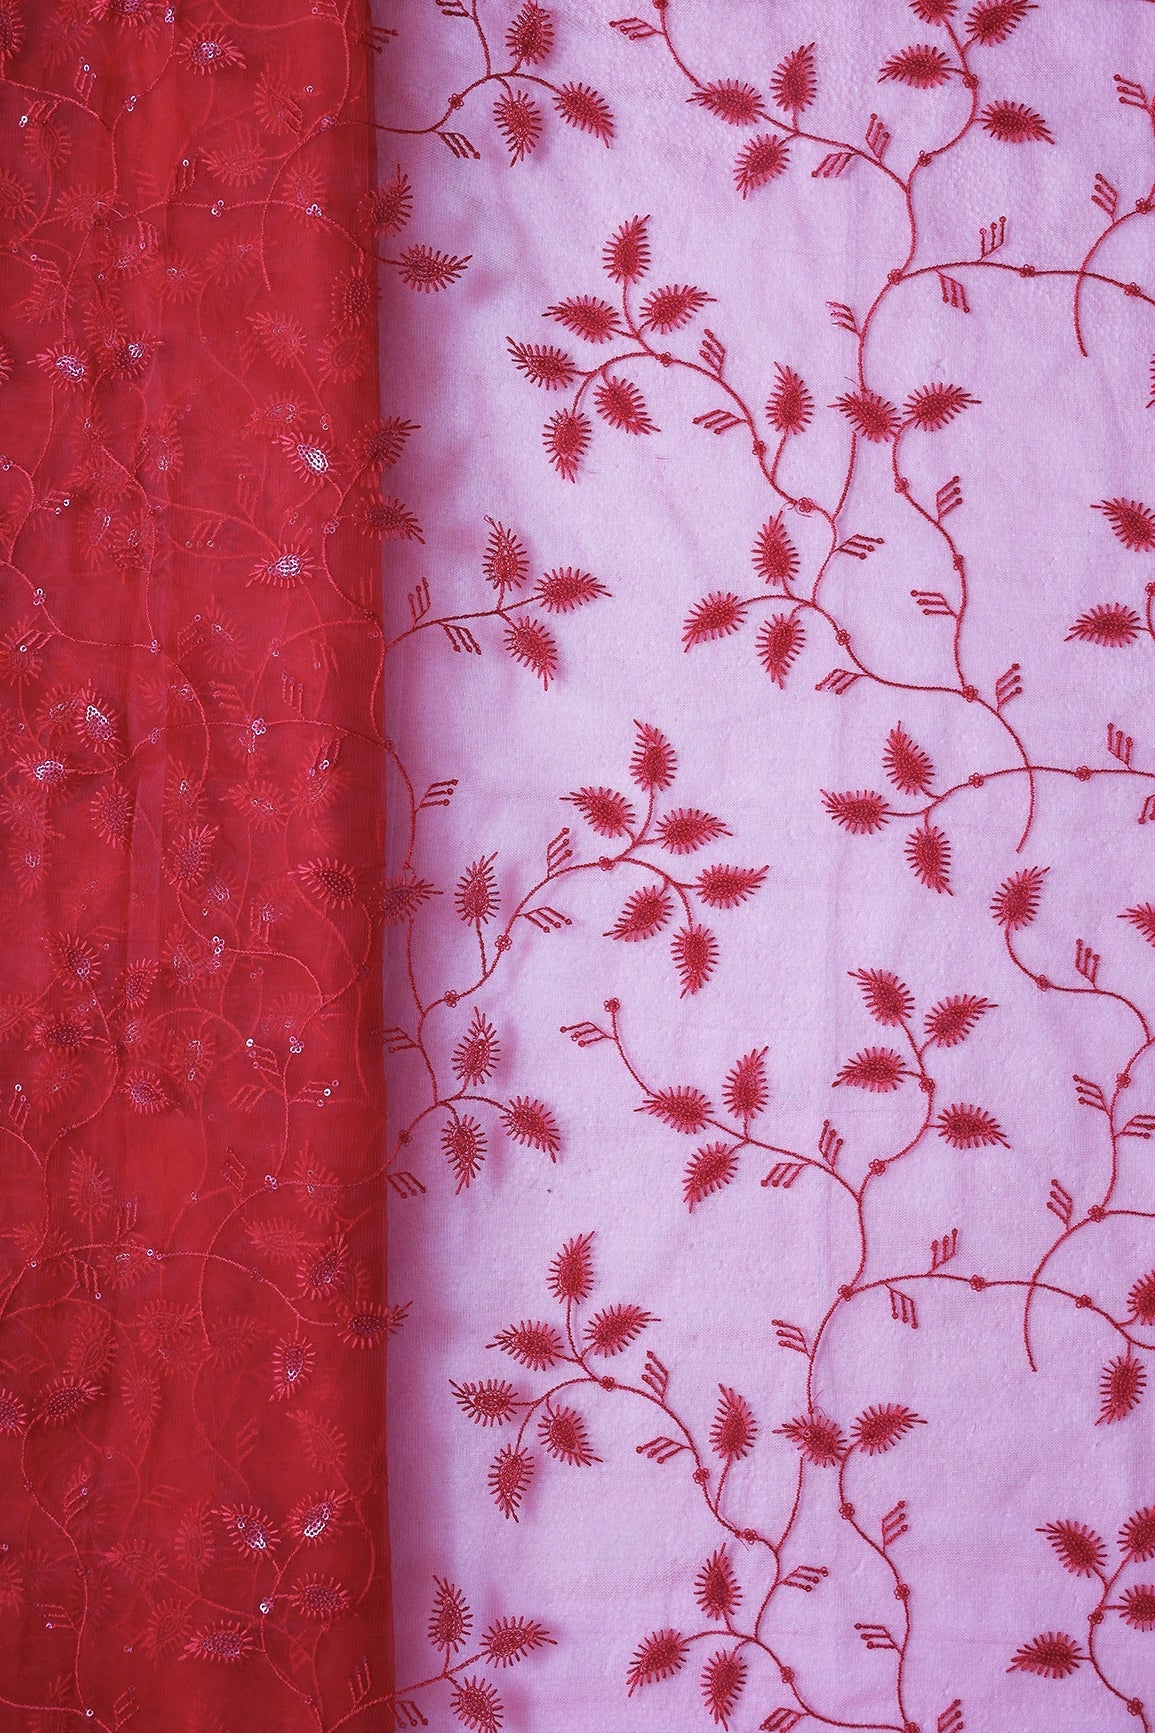 Red Thread With Water Sequins Beautiful Leafy Embroidery On Red Soft Net Fabric - doeraa